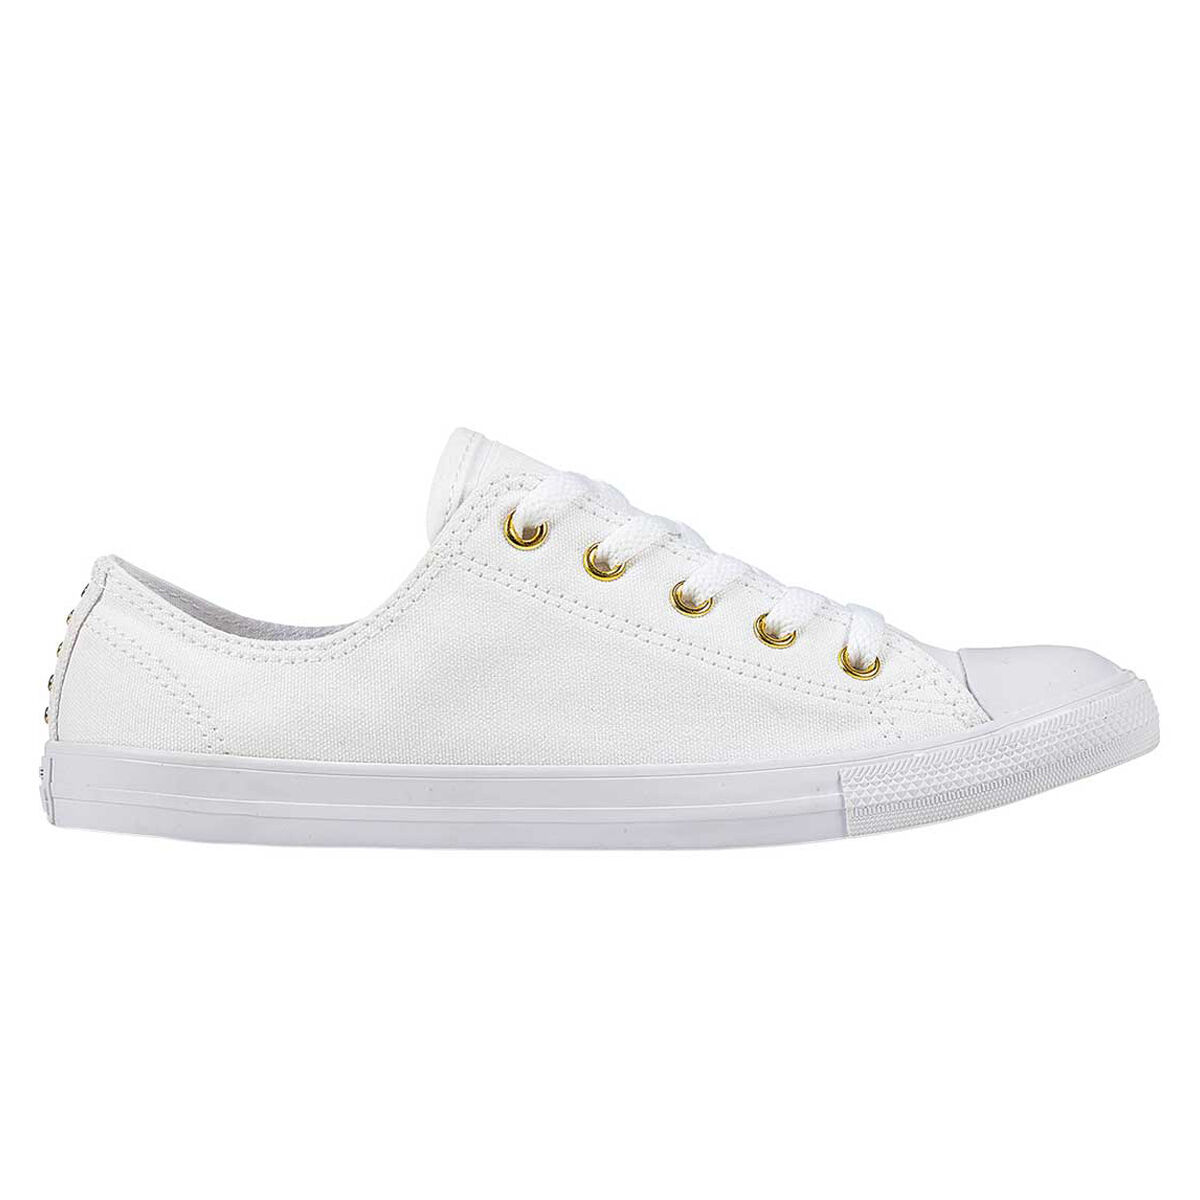 converse chuck taylor all star dainty shoes white